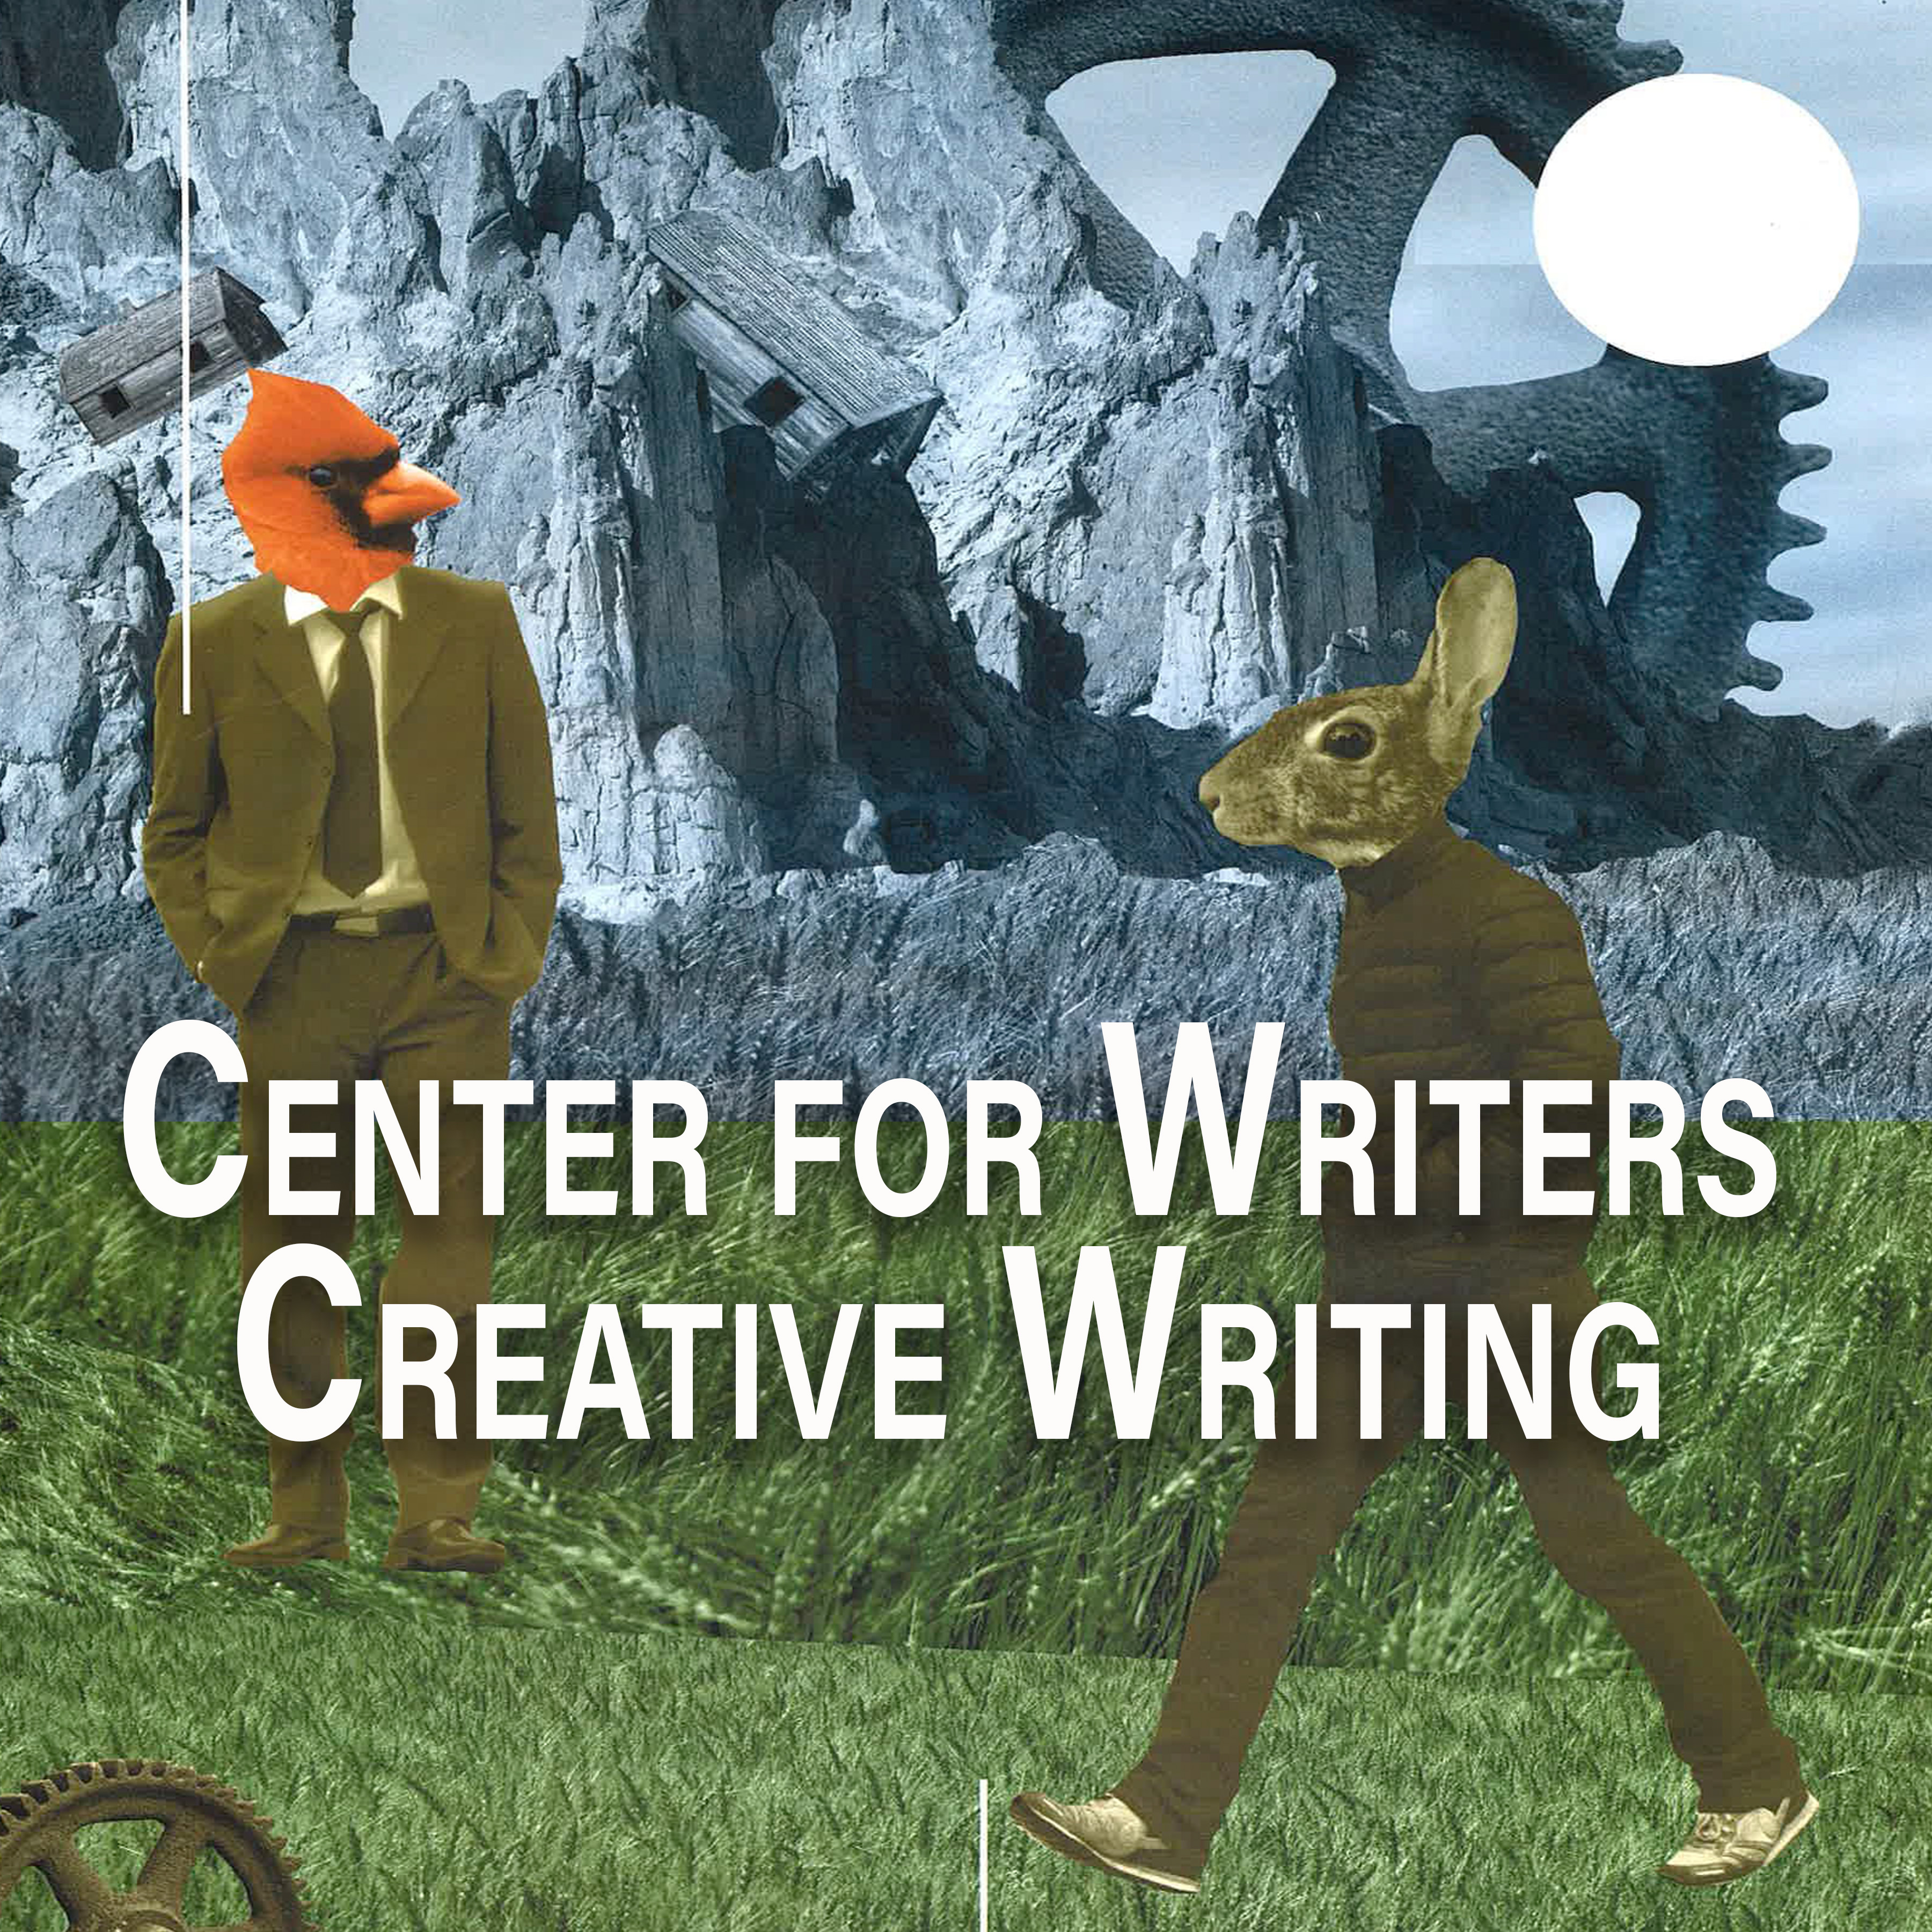 Center for Writers